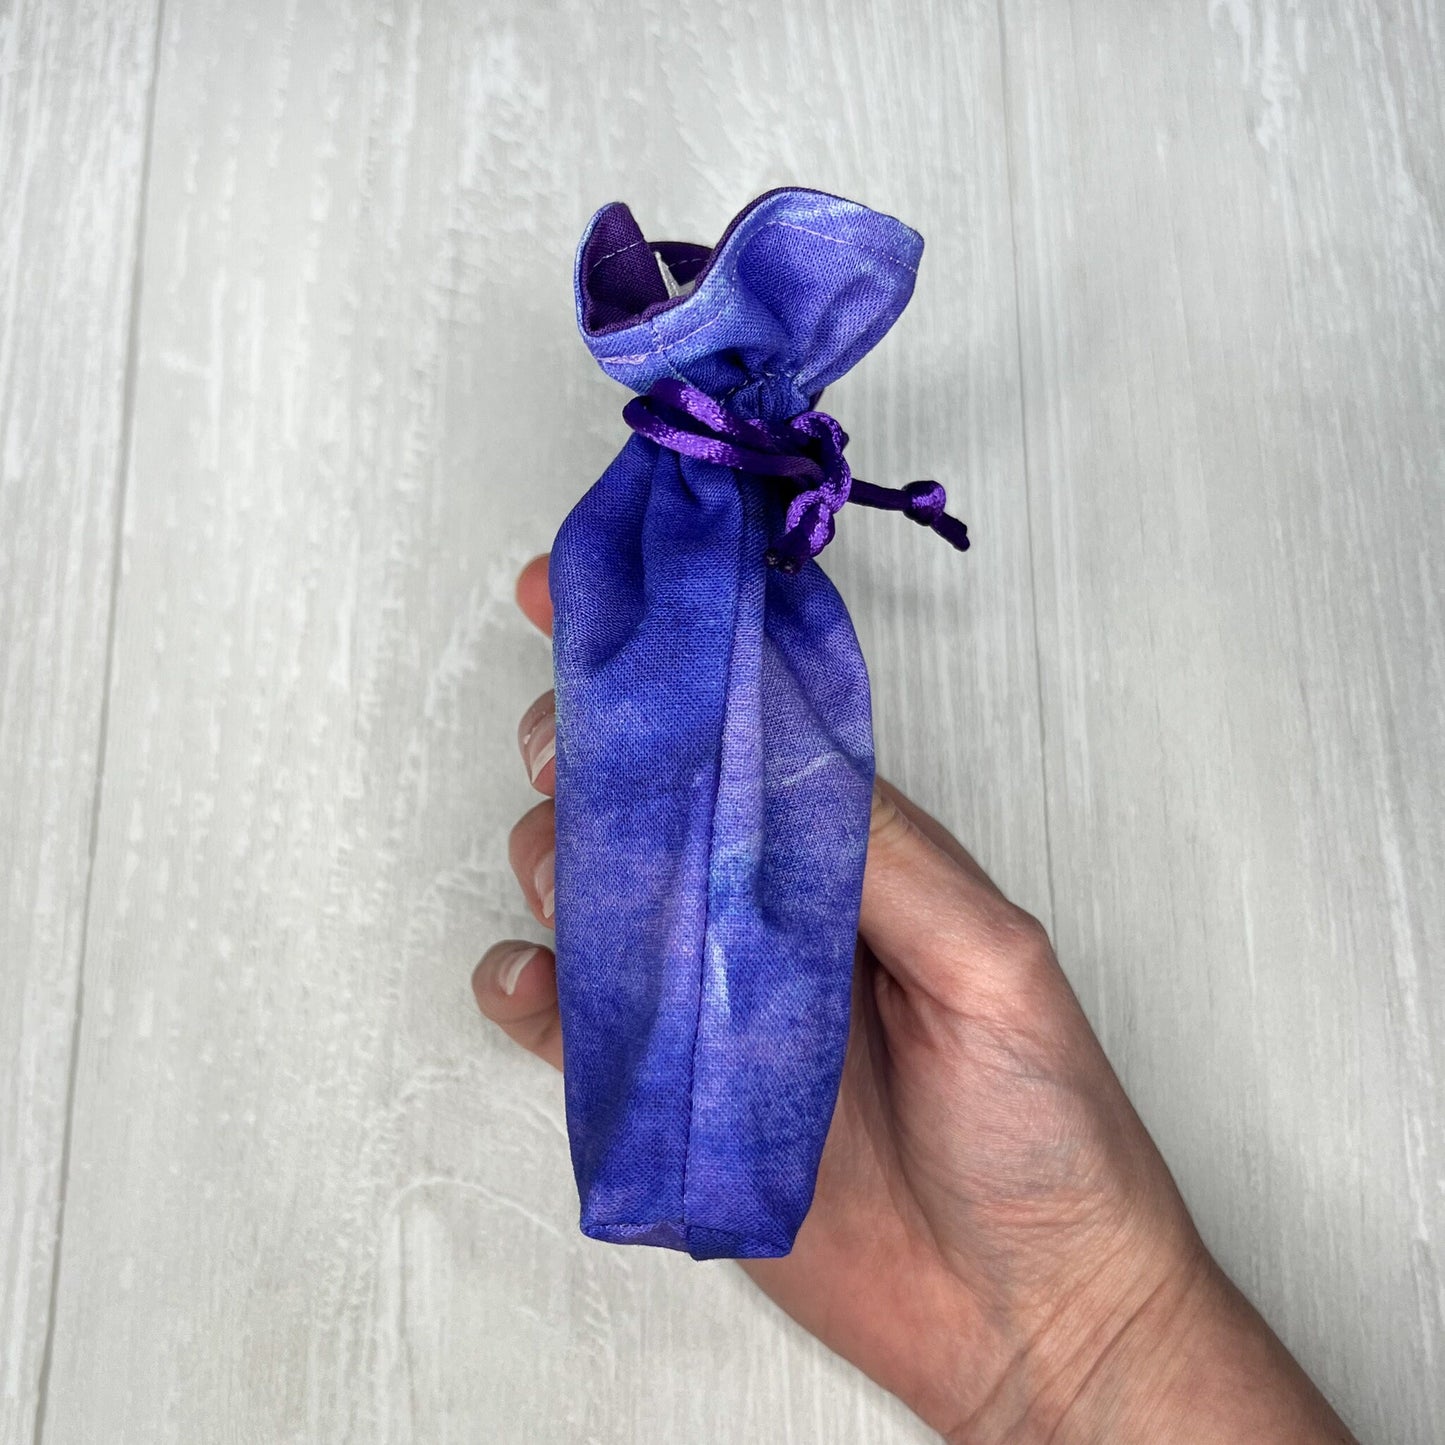 Mini Blue & Purple Tarot Deck Bag, Drawstring Pouch, Pocket Tarot, Dice Rune Crystal Bag, Witchcraft Wiccan Supplies Gift, Divination Tools